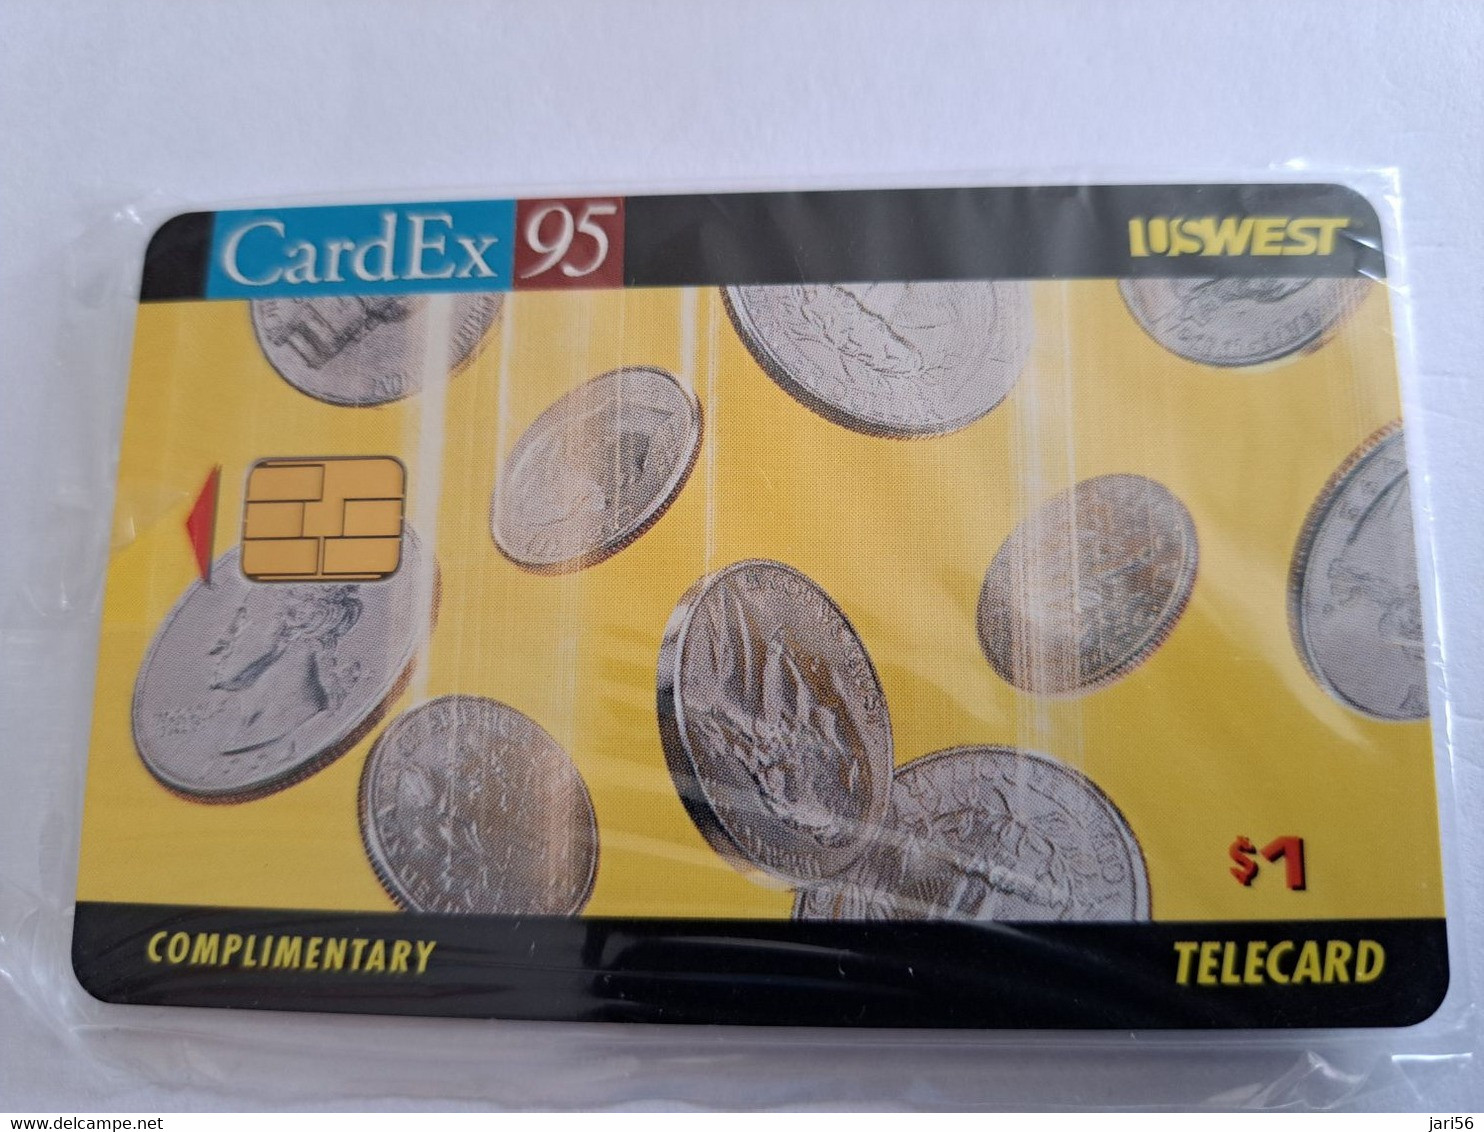 USA  ALASKA  CHIP  $1,00 CARDEX 95 US WEST /COMPLIMENTARY  MINT IN WRAPPER    **10574** - [2] Tarjetas Con Chip